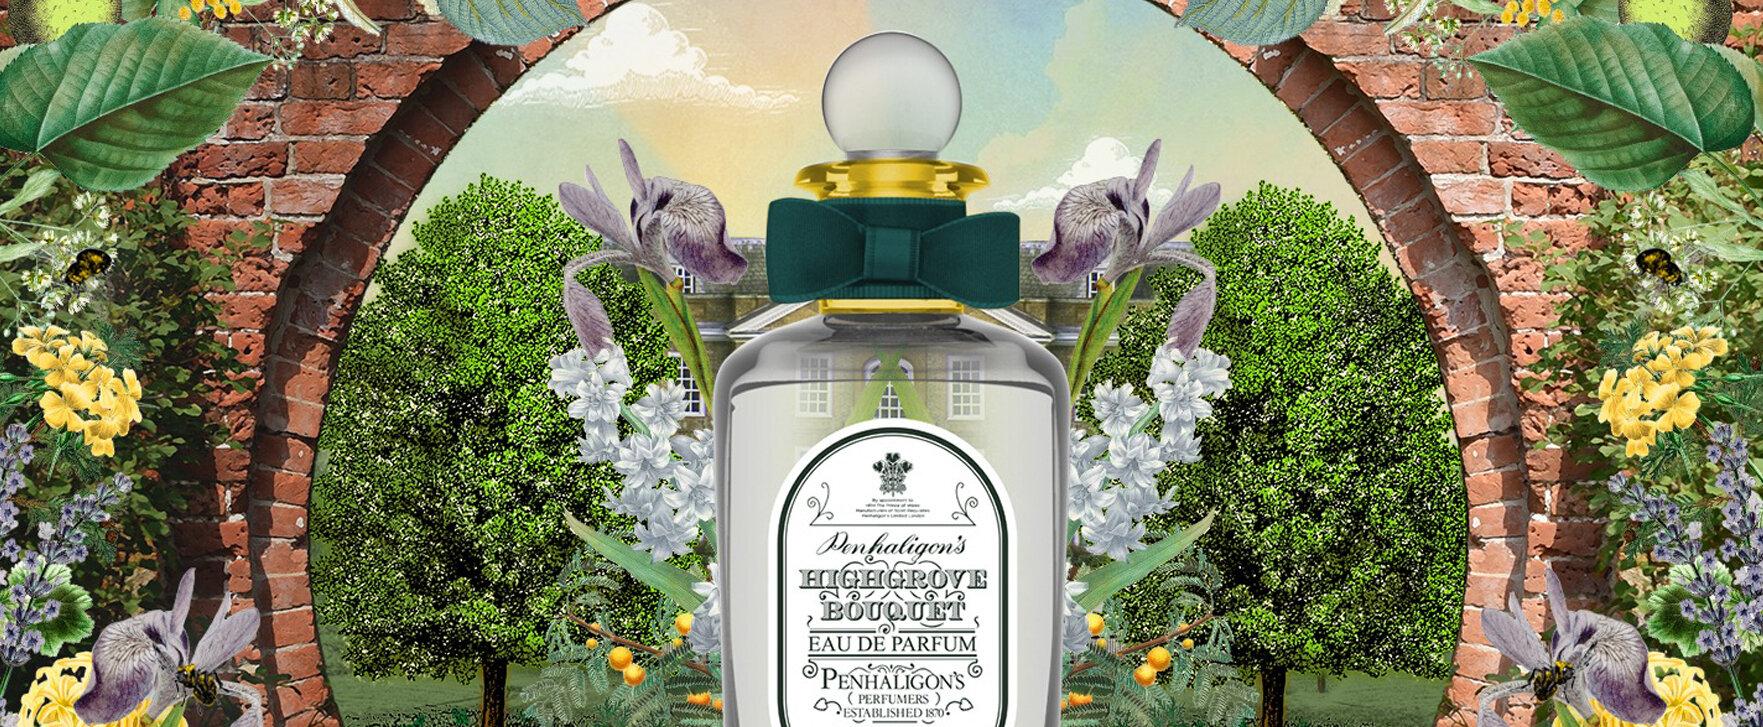 Royal Luxury and Environmental Awareness Combined in Penhaligon’s New “Highgrove Bouquet” Creation